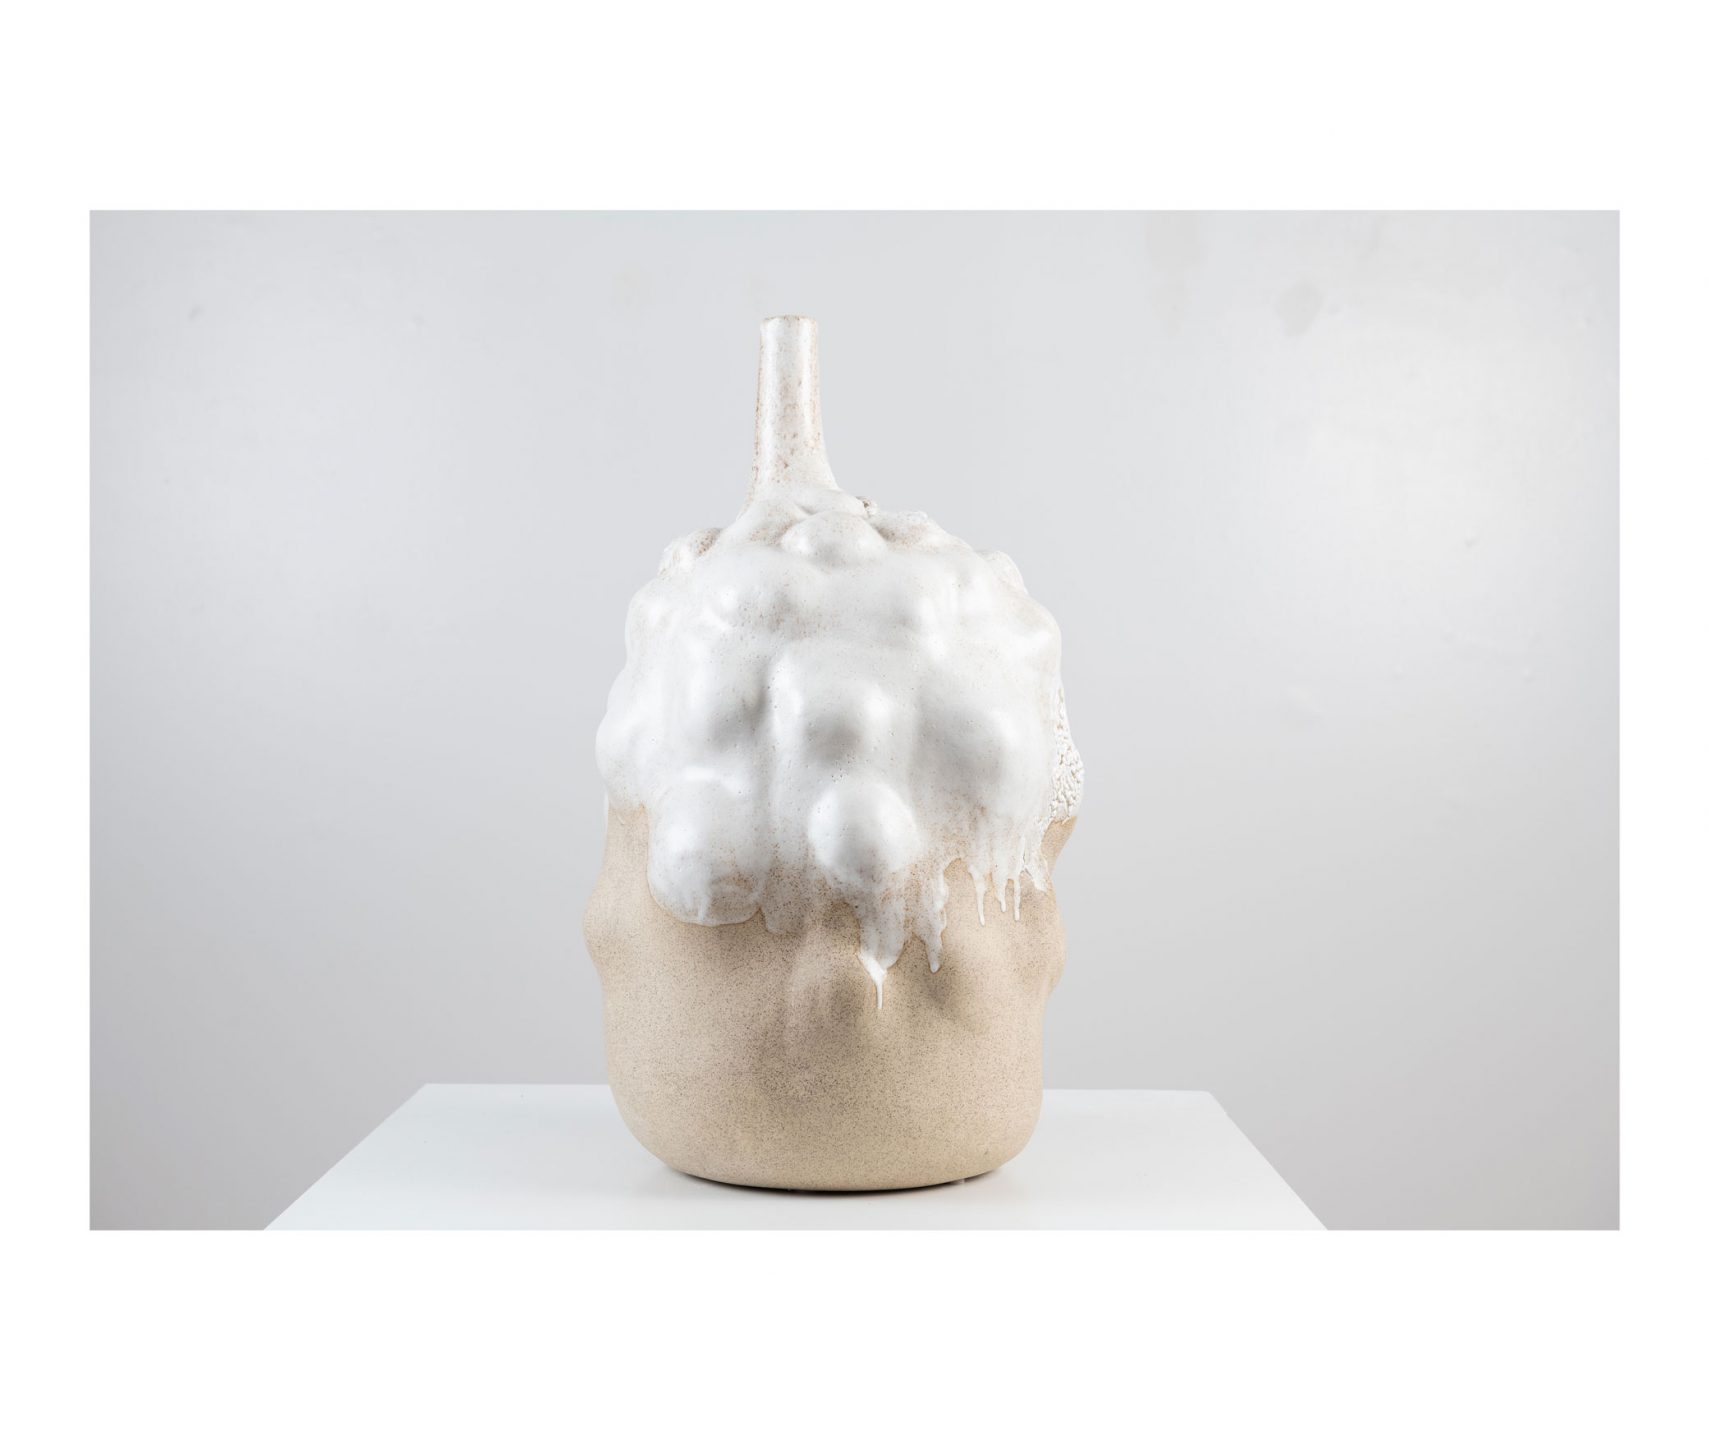 Wexler_Spora-Vessel-Glazed-and-raw-speckled-stoneware-2_int_products